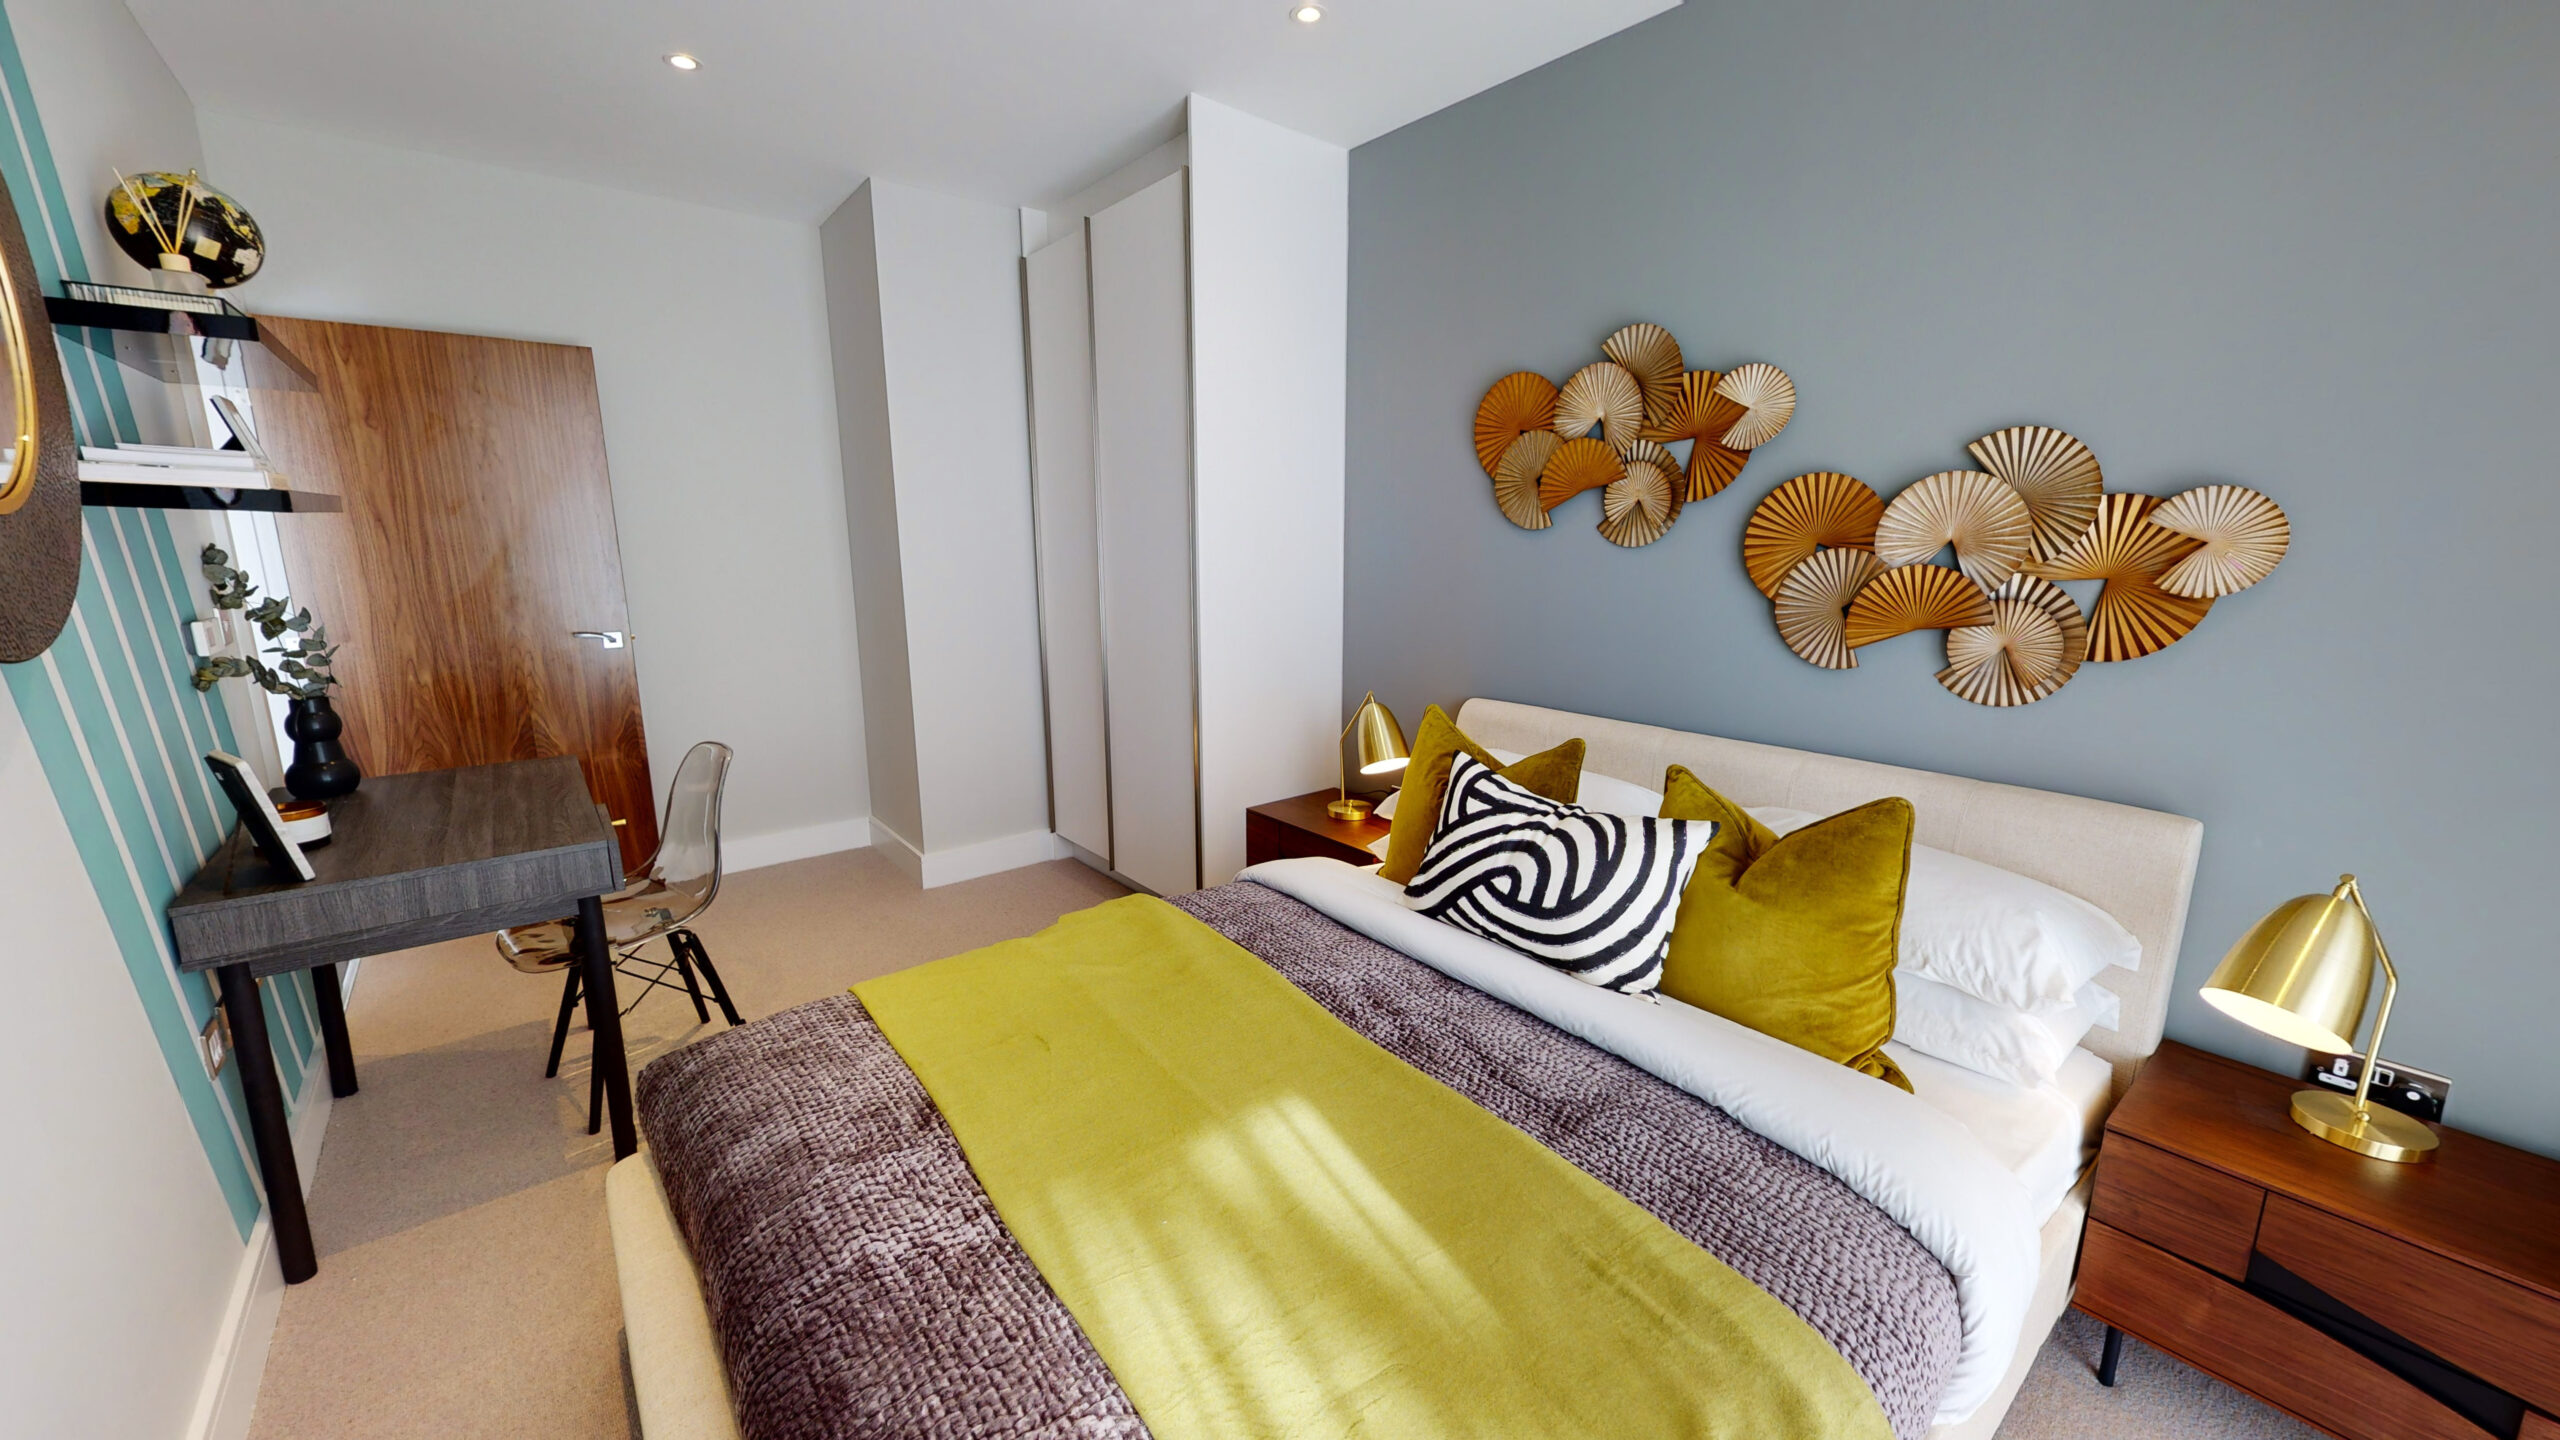 Image of a bedroom from the homes available at Orchard Wharf -  available to purchase through Shared Ownership on Share to Buy!